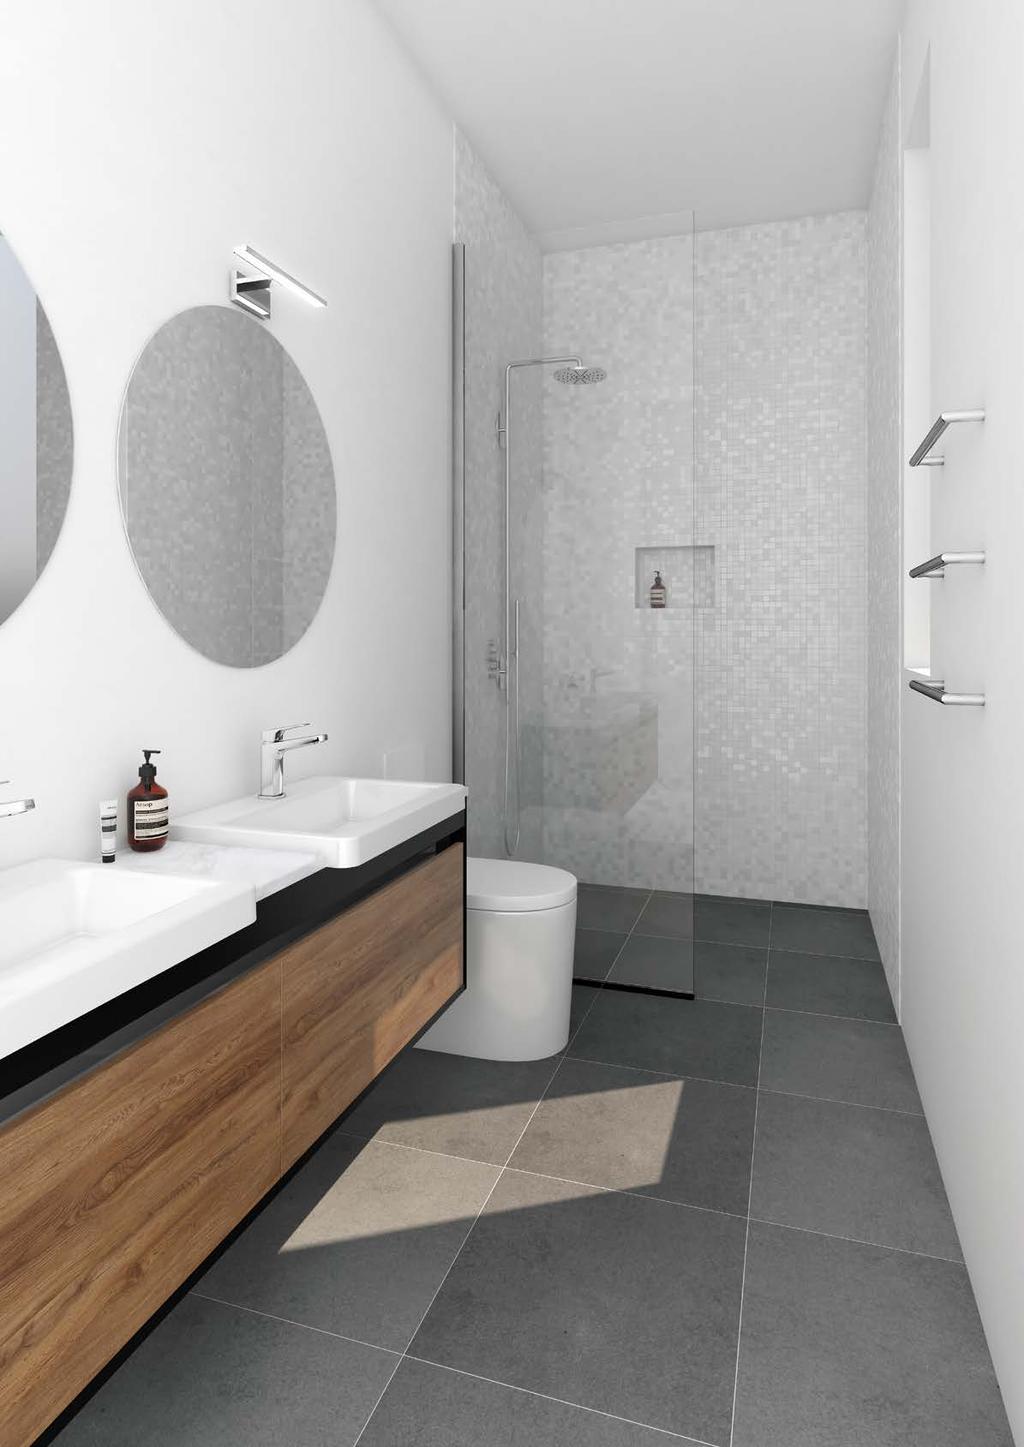 S/R Narrow long rooms If your bathroom is long and narrow, S/R lets you specify a single or basin solution that looks totally tailor-made for your space.